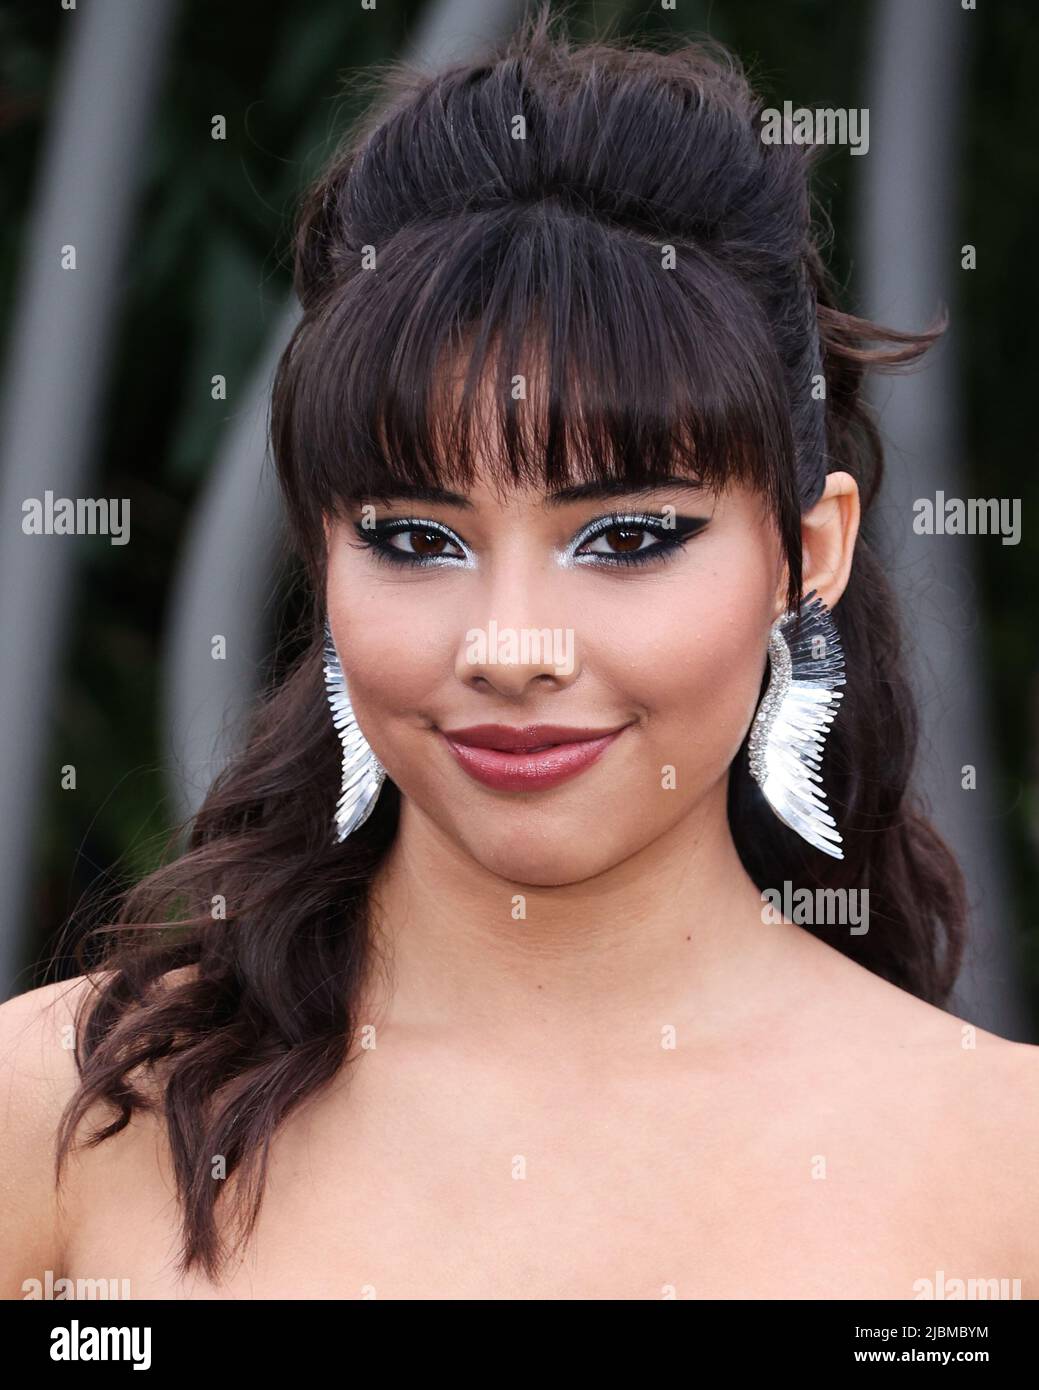 HOLLYWOOD, LOS ANGELES, CALIFORNIA, USA - JUNE 06: American actress Xochitl Gomez arrives at the Los Angeles Premiere Of Universal Pictures' 'Jurassic World Dominion' held at the TCL Chinese Theatre IMAX on June 6, 2022 in Hollywood, Los Angeles, California, United States. (Photo by Xavier Collin/Image Press Agency) Stock Photo